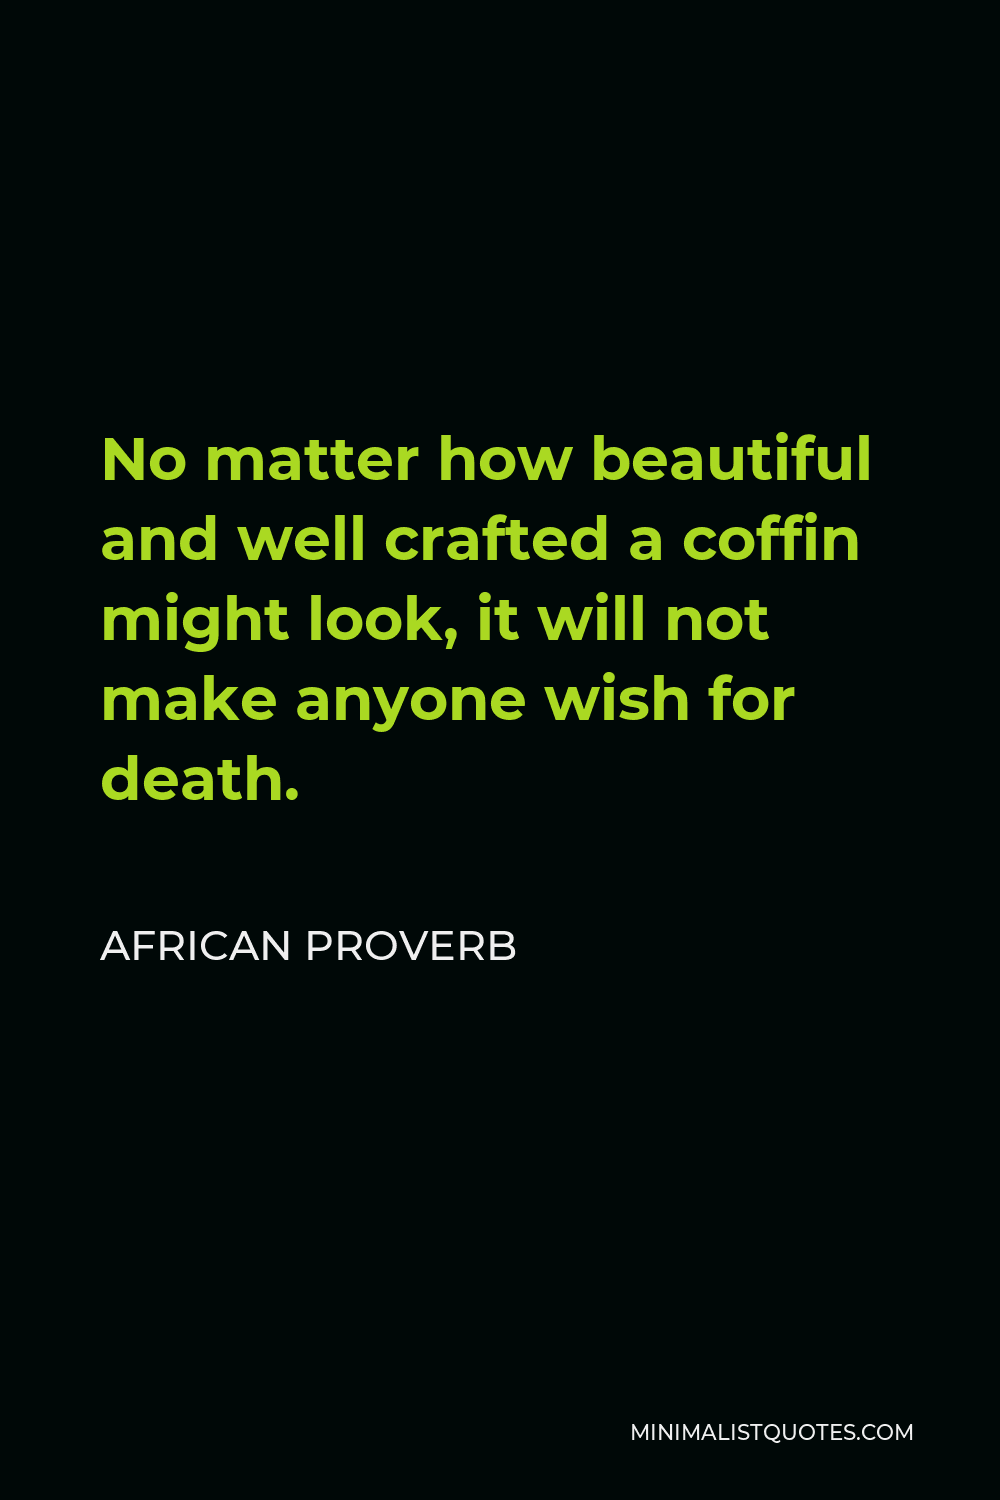 African Proverb Quote - No matter how beautiful and well crafted a coffin might look, it will not make anyone wish for death.